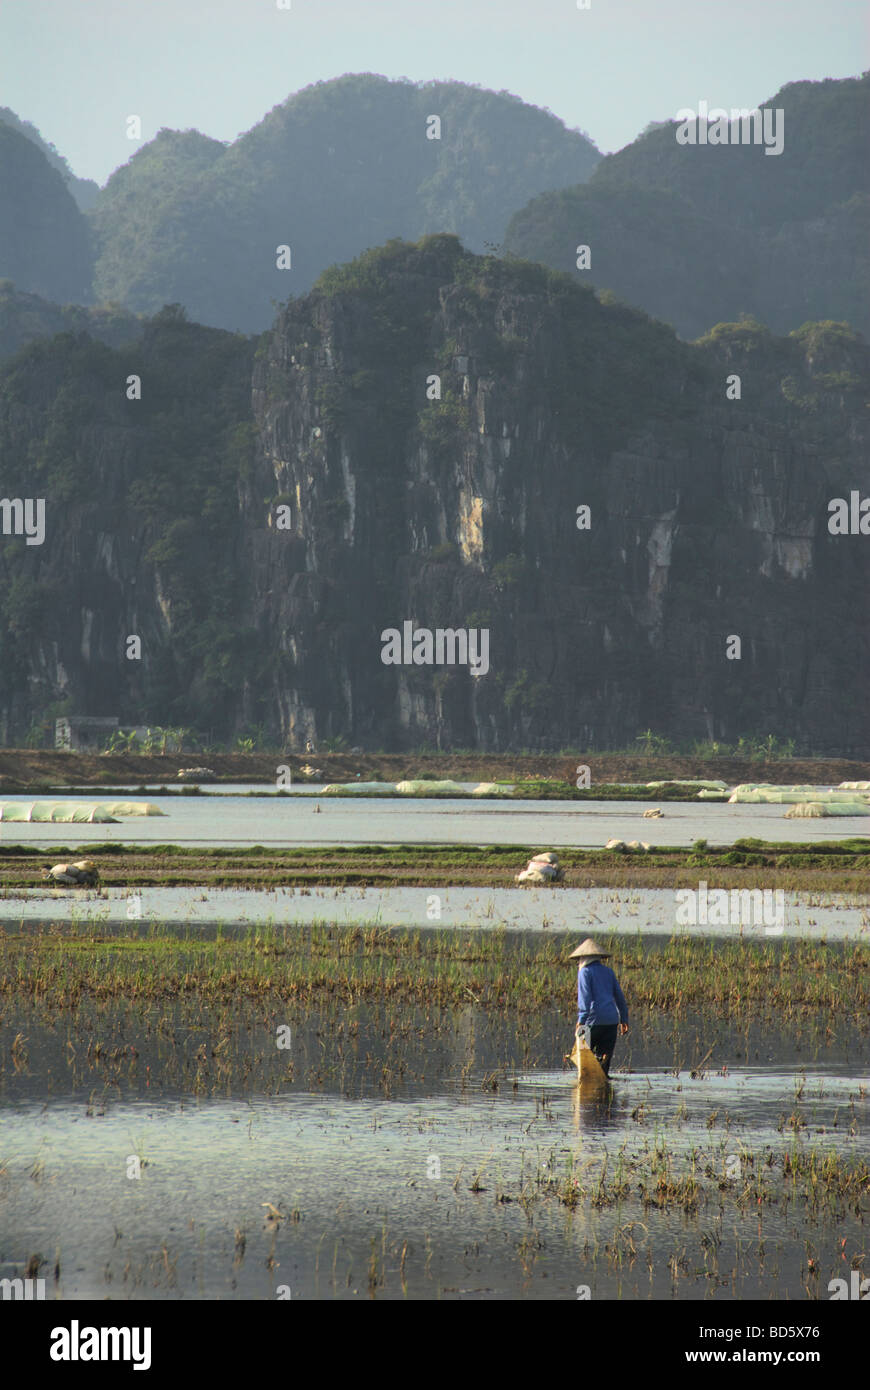 Woman walking in flooded rice fields with limestone karsts in background Tam Coc Ninh Binh Province Northern Vietnam Stock Photo